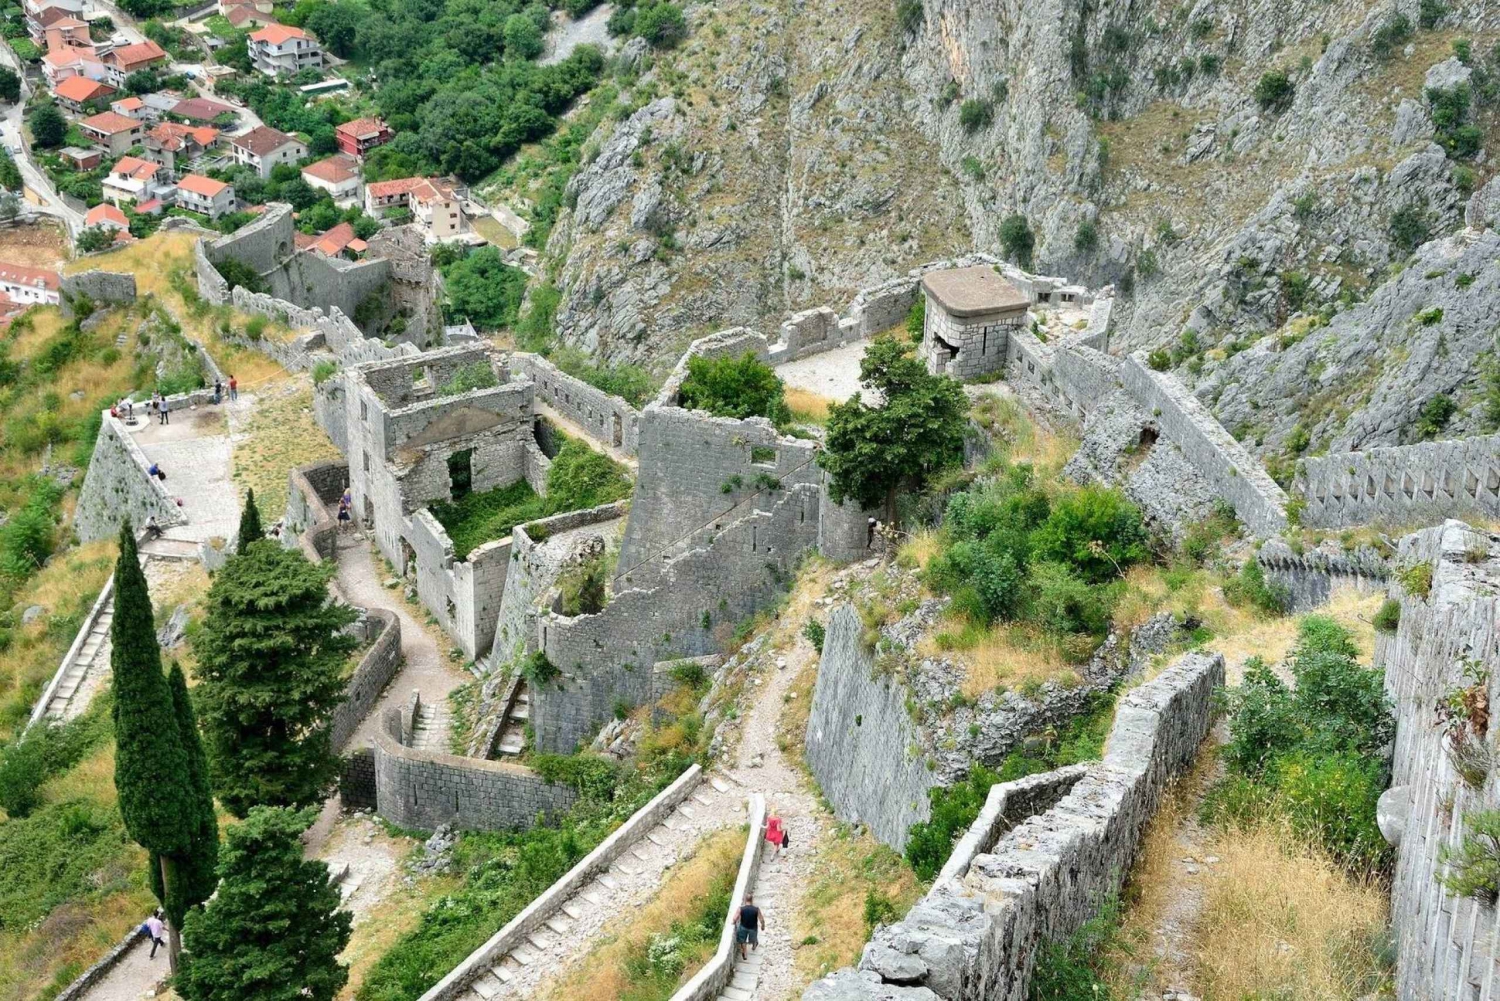 Private Day Tour of Budva and Kotor, Montenegro from Tirana